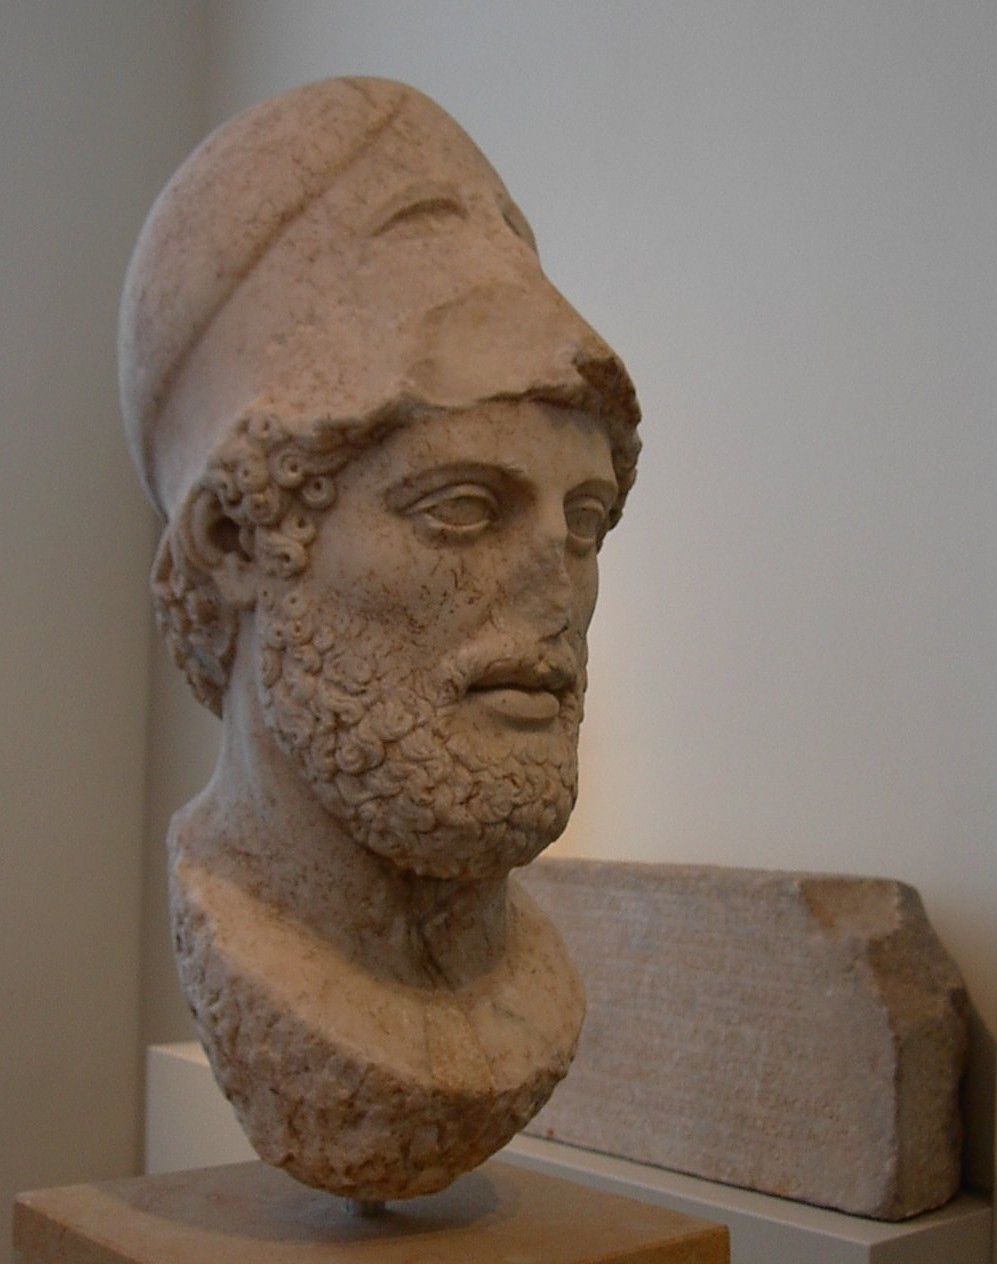 Pericles - Staatliche Museen zu Berlin - foto: Adam Carr, Wikimedia Commons <http://commons.wikimedia.org/wiki/File:Pericles_bust.jpg>